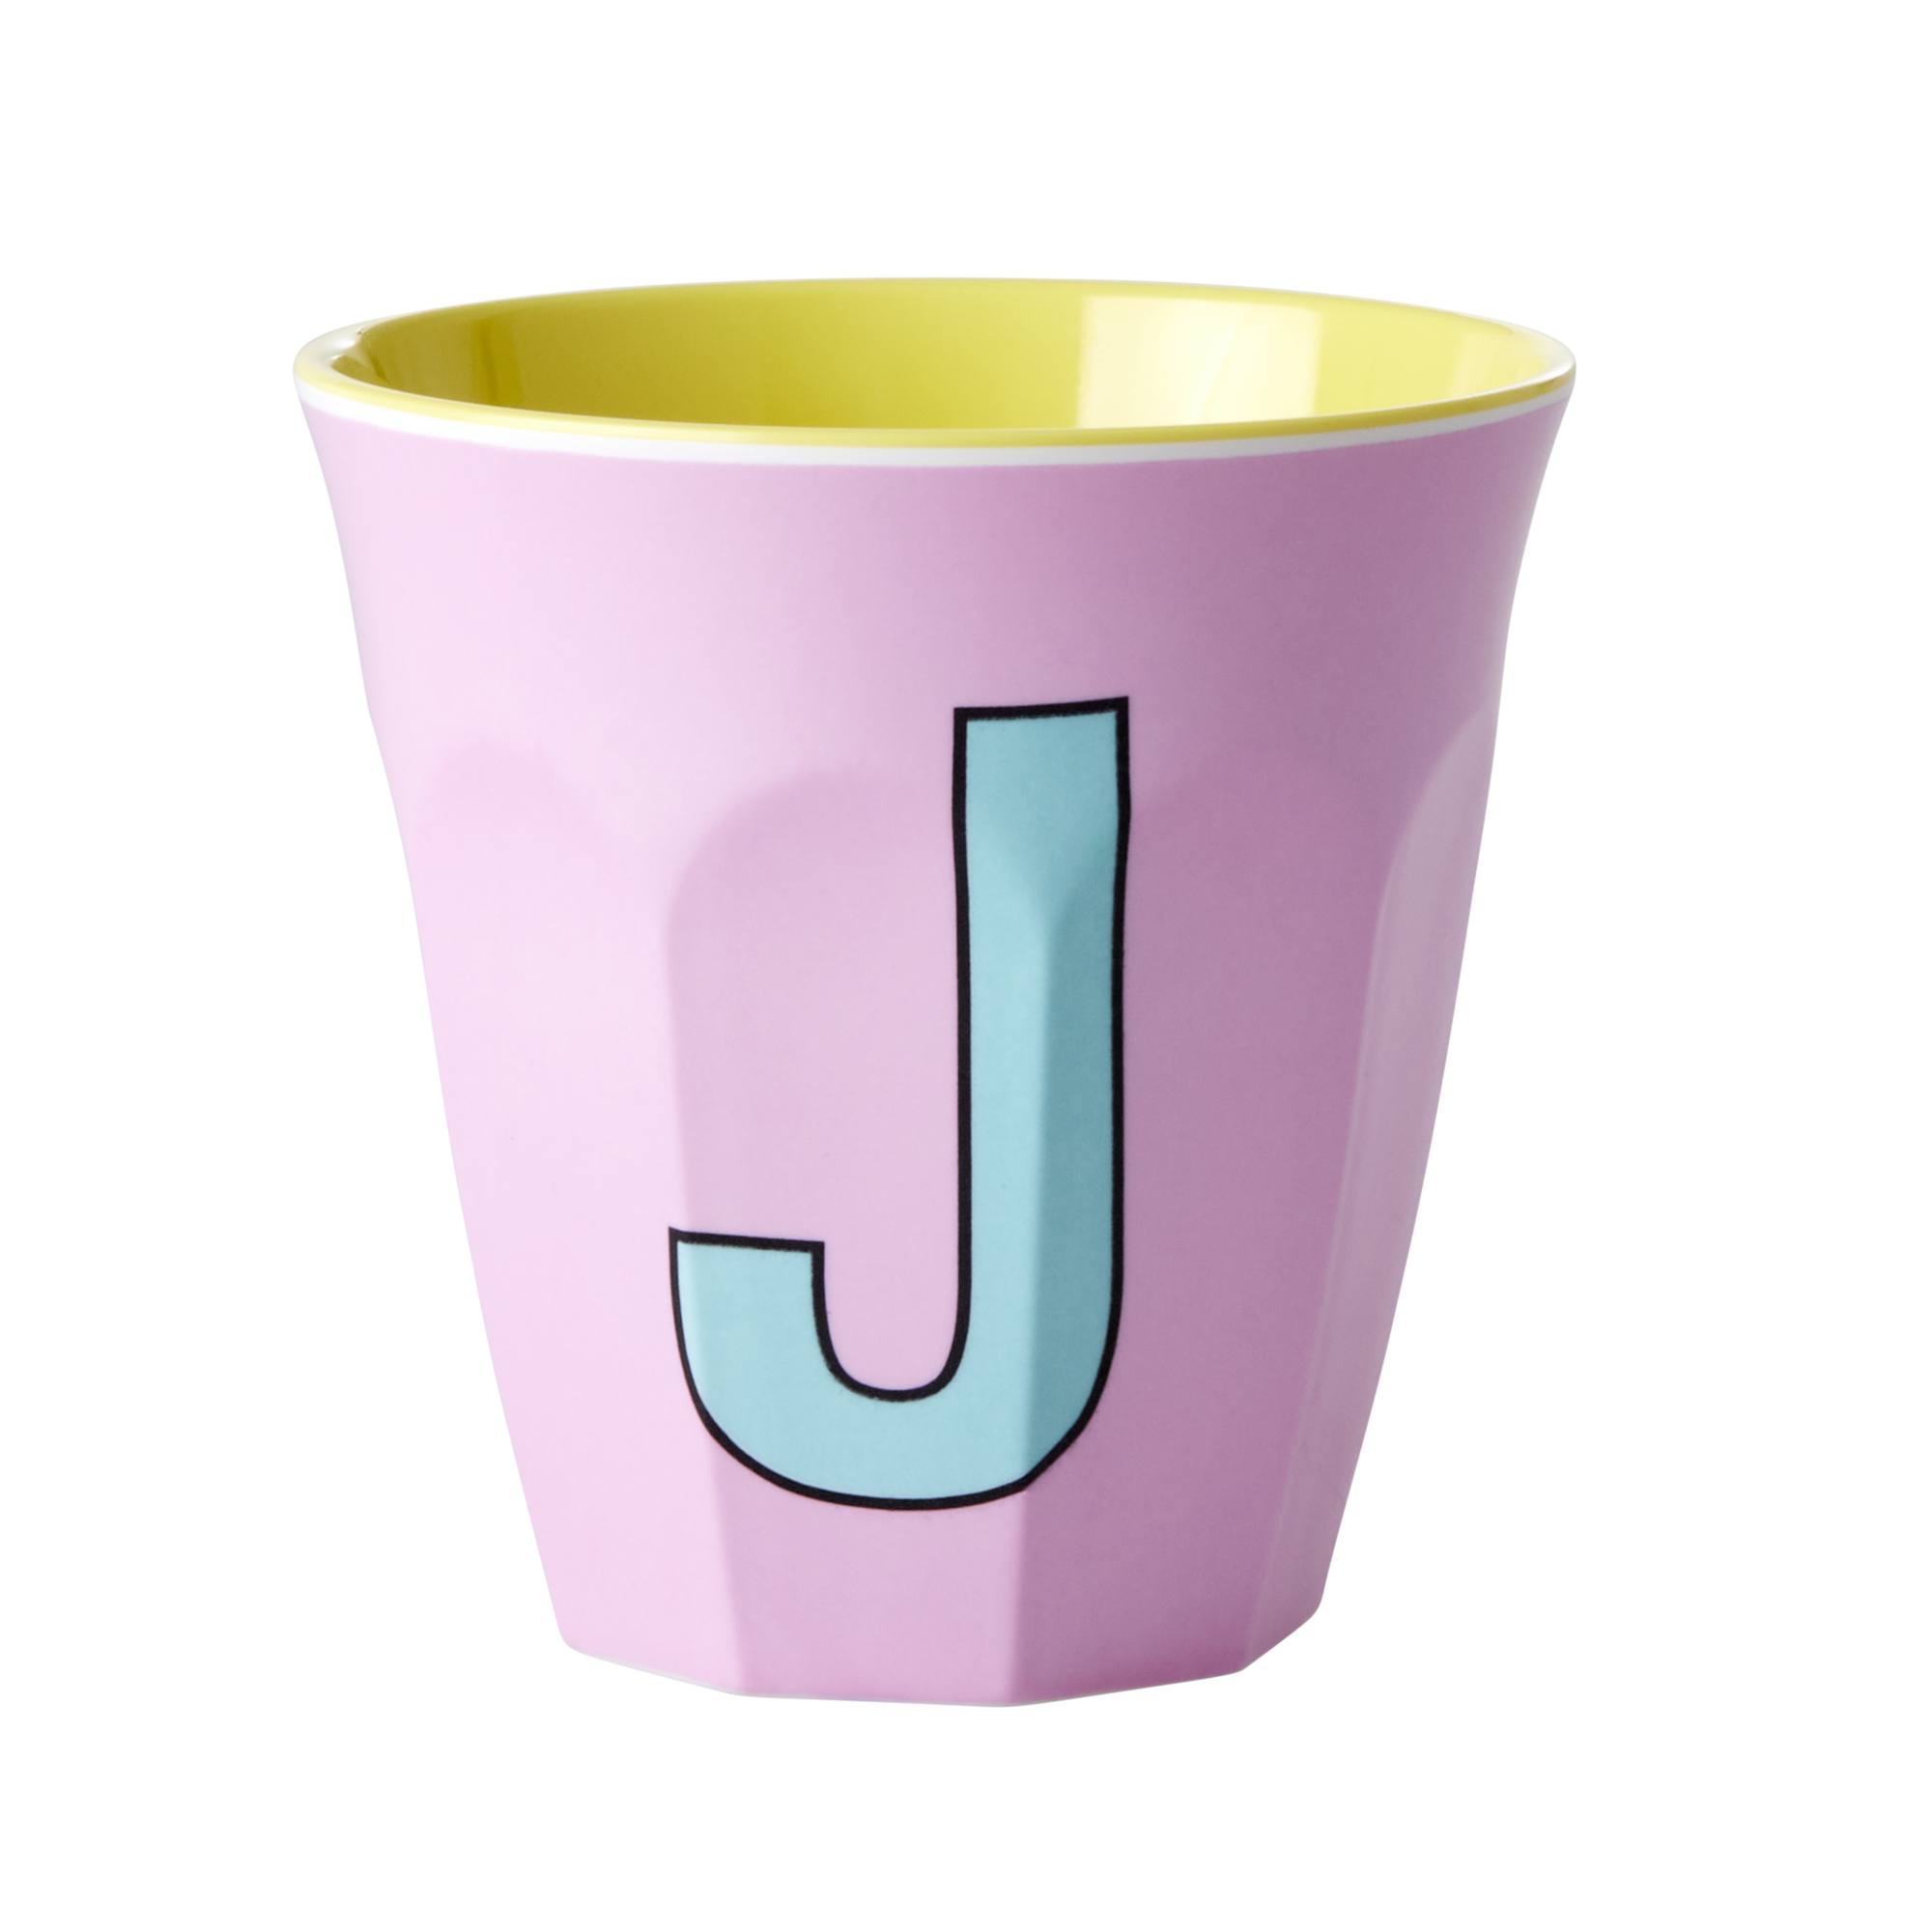 Melamine cup by Rice by Rice in the colors pink, light blue, and yellow with the letter "J"